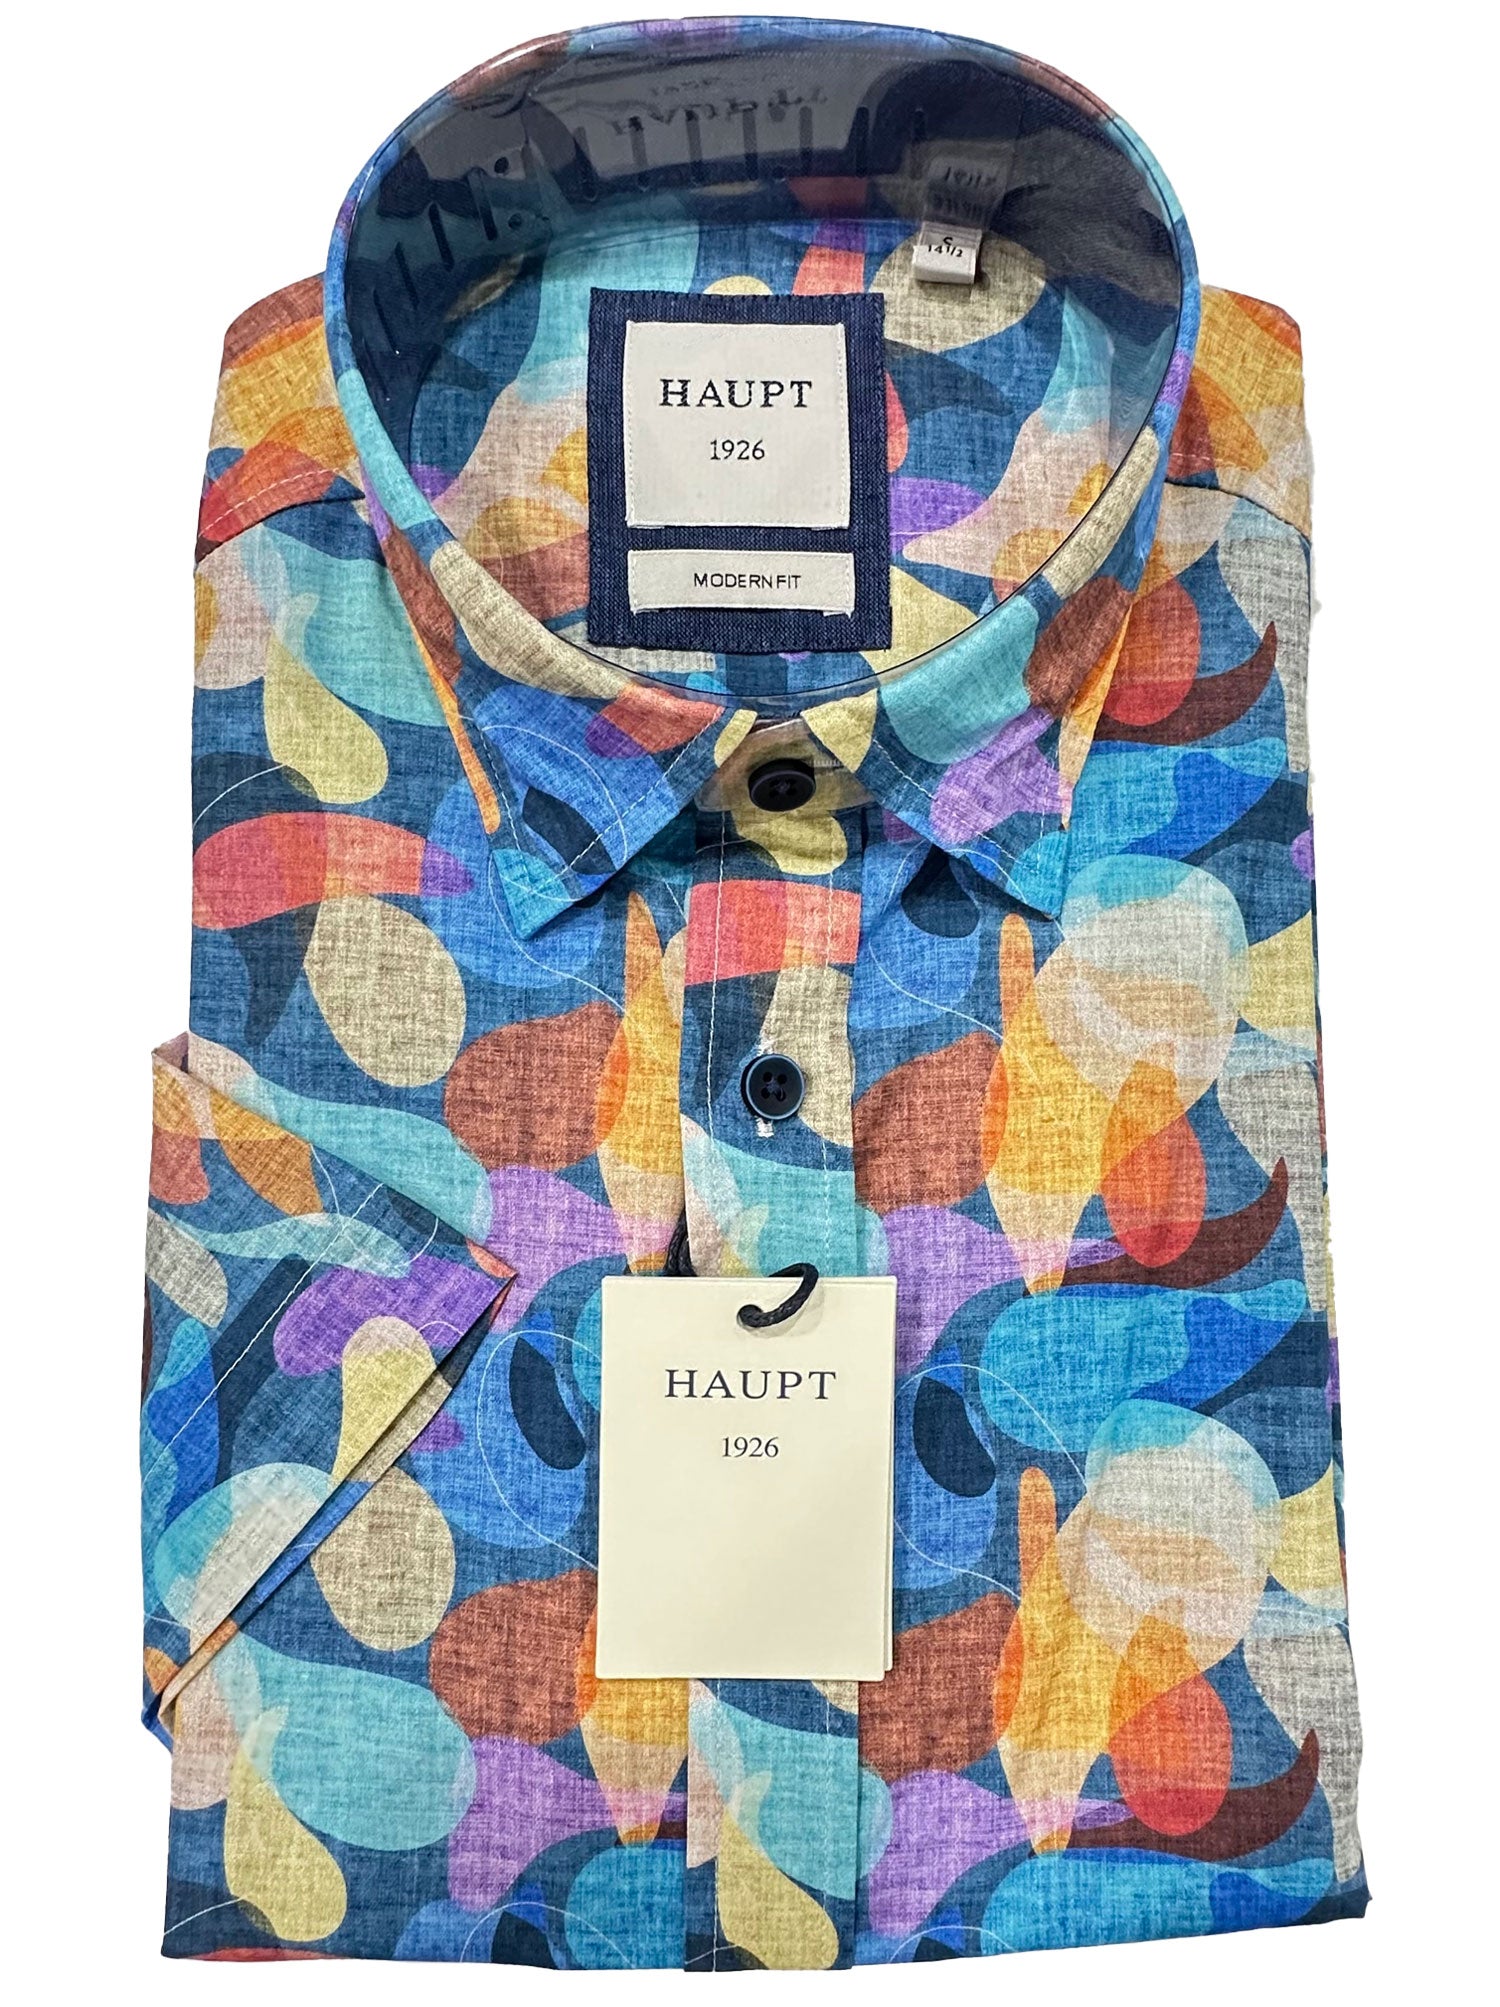 Haupt S/S -38579  https://harrysformenswear.com.au/products/haupt-s-s-38579  For almost a century, Haupt Fashion Group has been producing quality and creative textiles. Our collections are designed for quality and comfort, resulting in unique details. Well-known worldwide, we now deliver to Harrys. All Cotton Designed in Europe Modern Fit